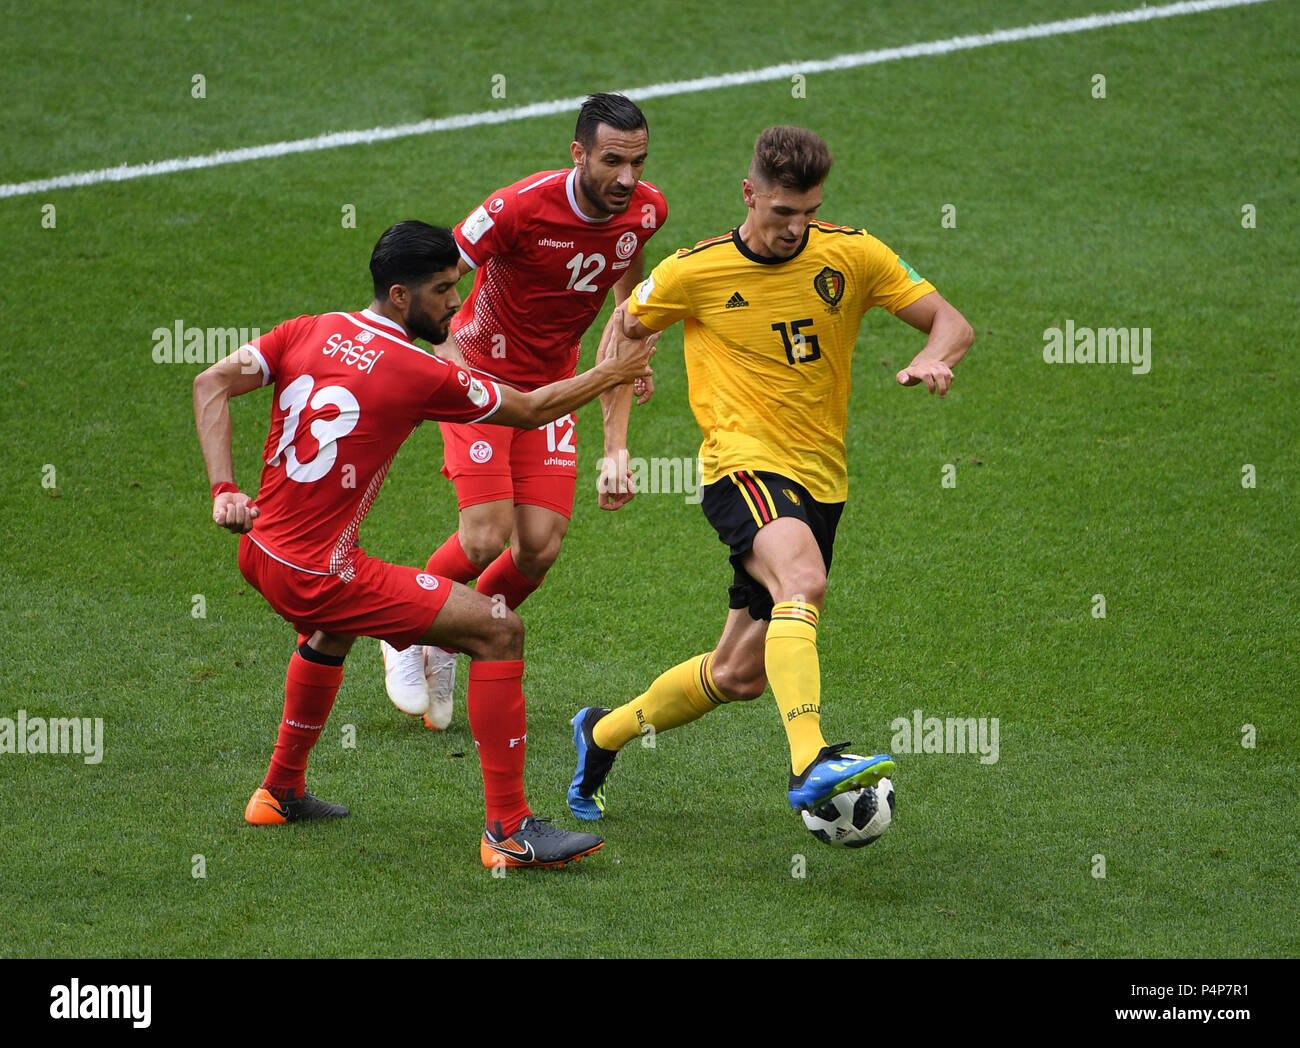 Moscow, Russia. 23rd June, 2018. Thomas Meunier (R) of Belgium breaks through with the ball during the 2018 FIFA World Cup Group G match between Belgium and Tunisia in Moscow, Russia, June 23, 2018. Credit: Wang Yuguo/Xinhua/Alamy Live News Stock Photo